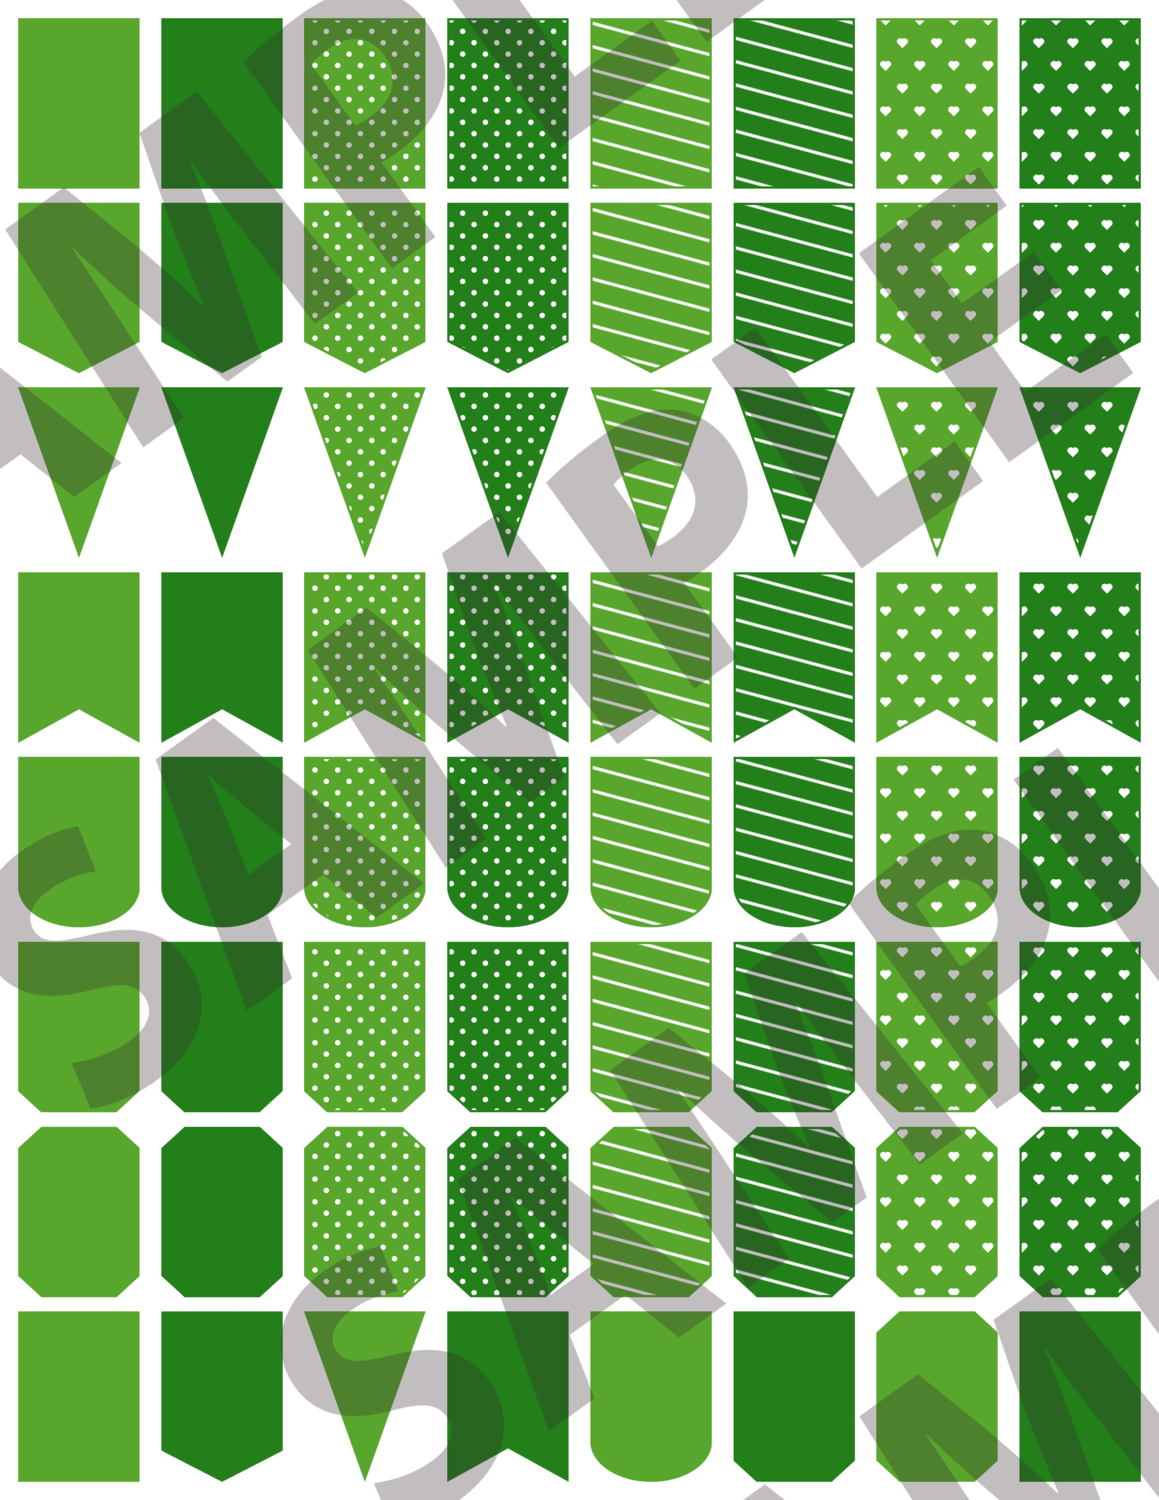 Green 2 - Small Banners